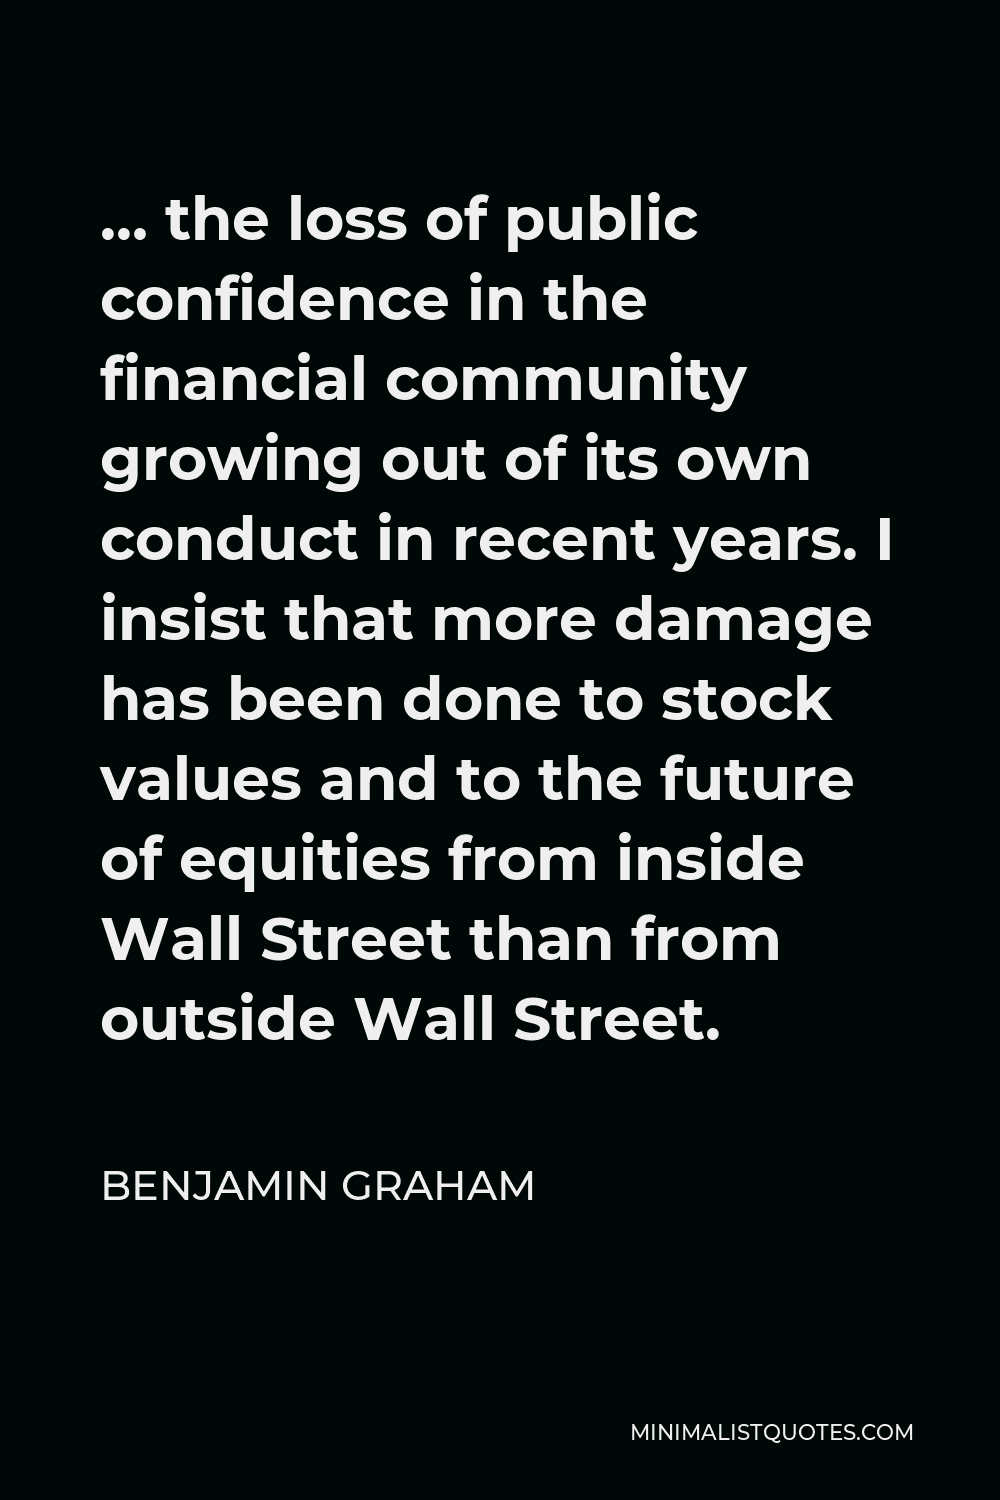 Benjamin Graham Quote - … the loss of public confidence in the financial community growing out of its own conduct in recent years. I insist that more damage has been done to stock values and to the future of equities from inside Wall Street than from outside Wall Street.